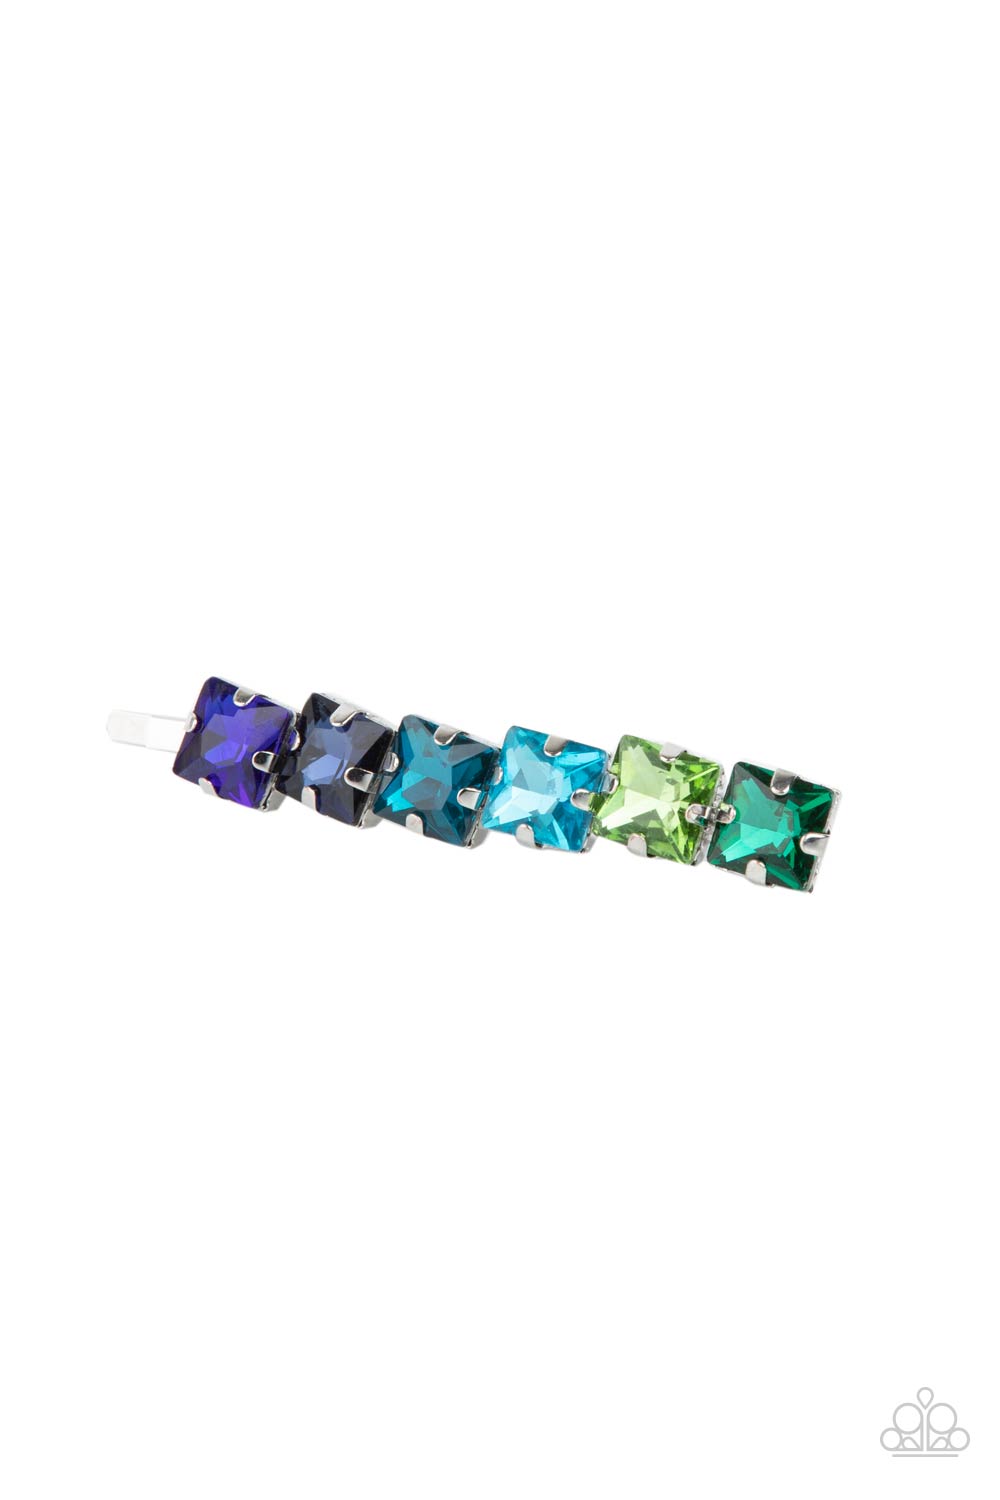 Prismatically Pinned Multi Green Blue Hair Pin - Paparazzi Accessories-on model - CarasShop.com - $5 Jewelry by Cara Jewels